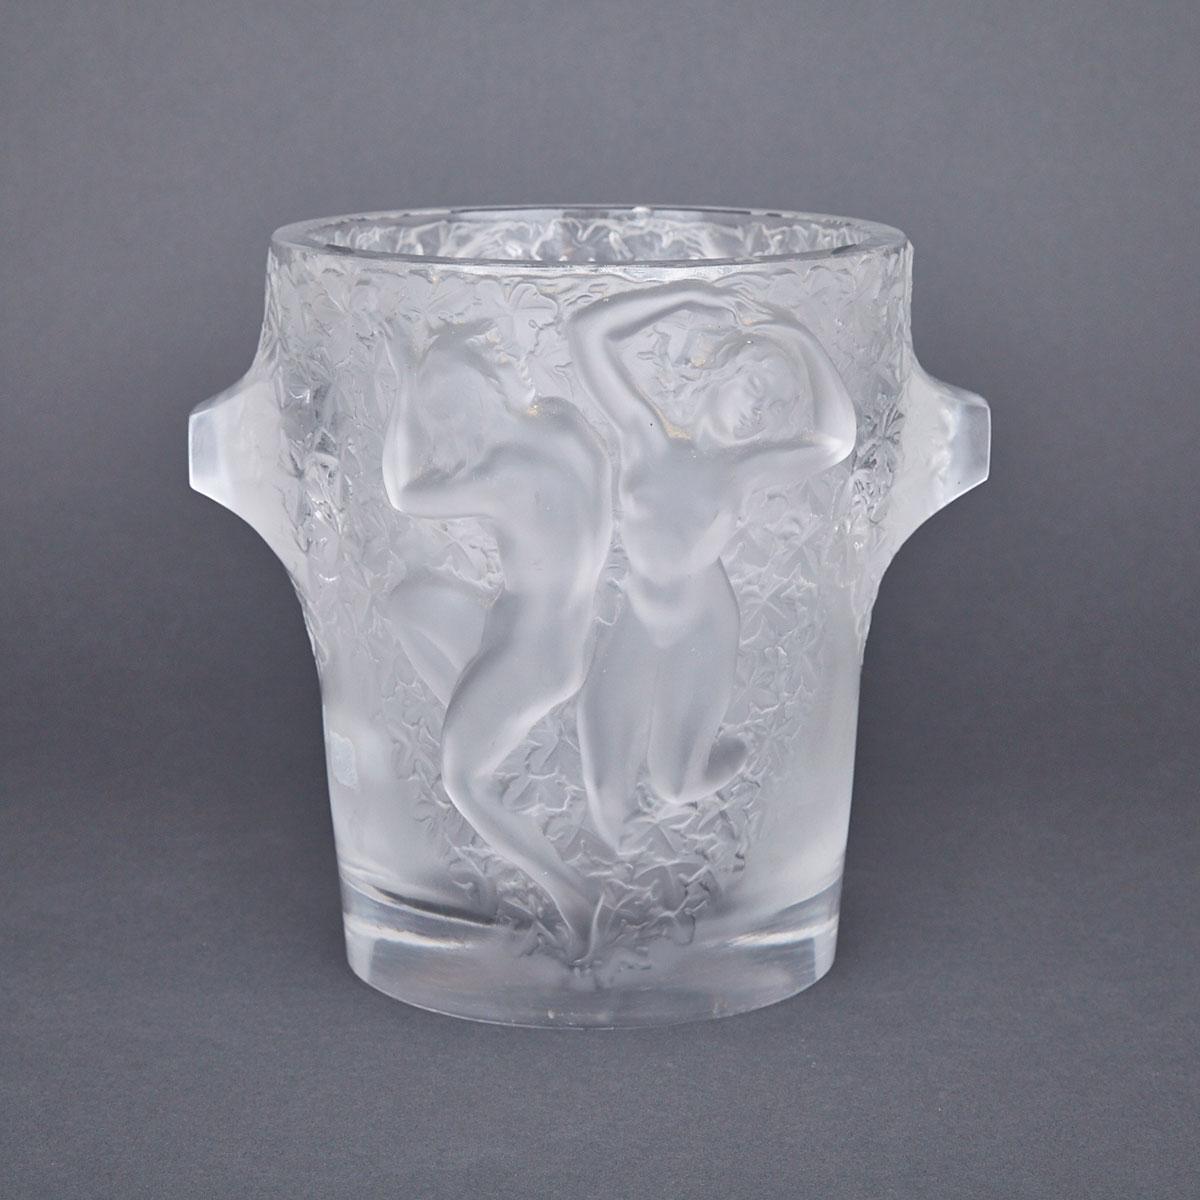 ‘Ganymede’, Lalique Moulded and Frosted Glass Wine Cooler, post-1945